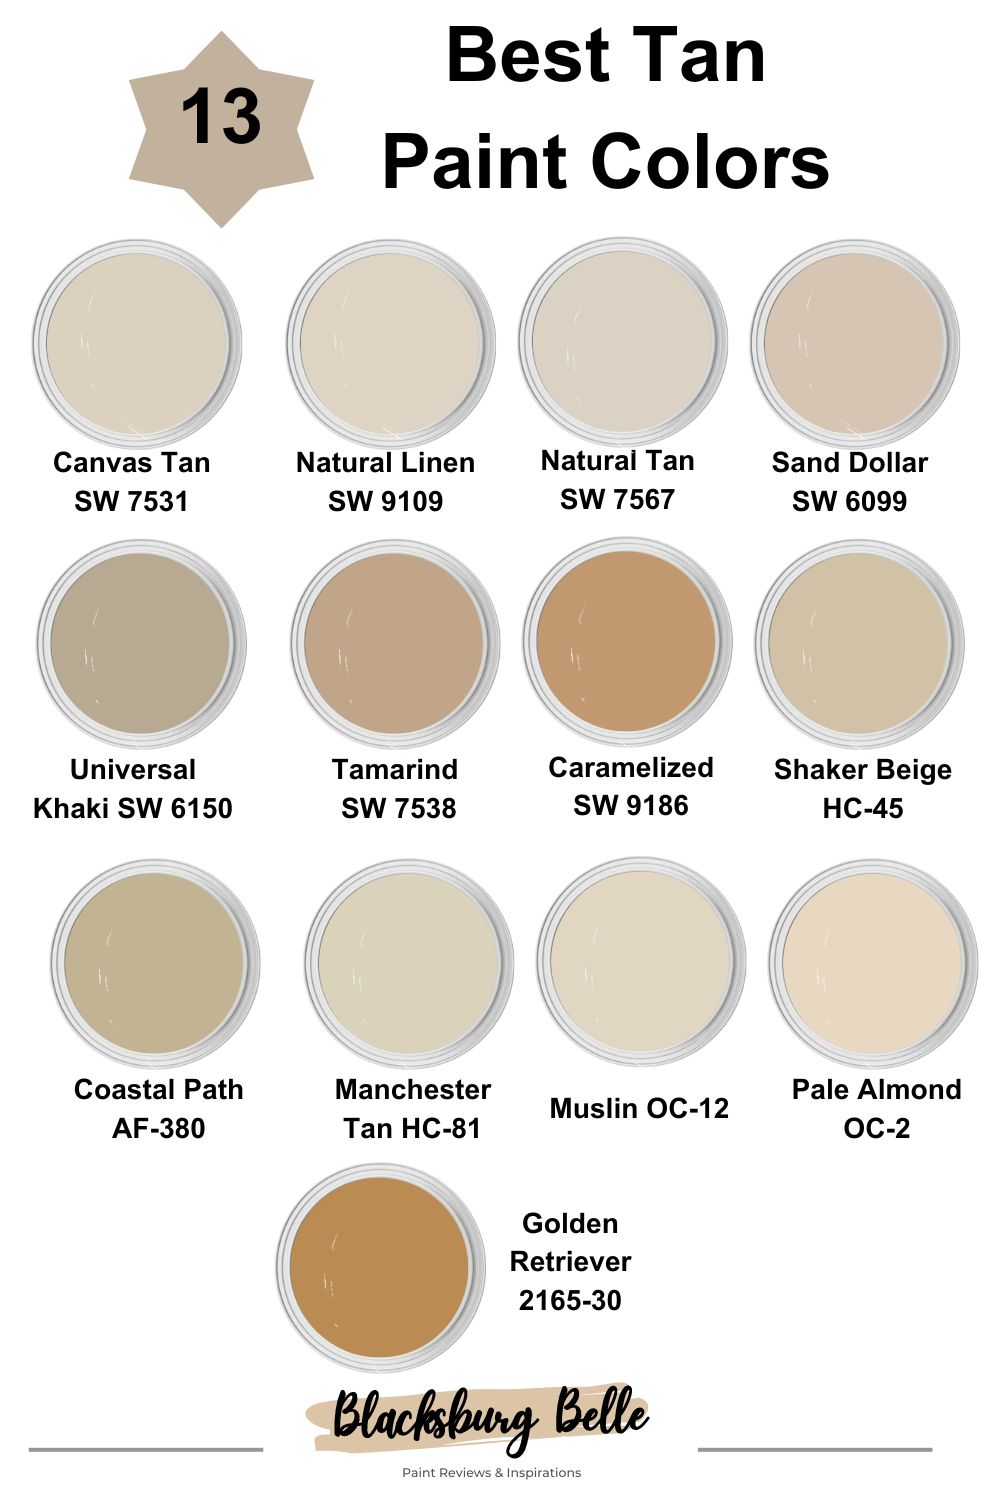 13 Best Tan Paint Colors for Interior Designs From Light to Dark